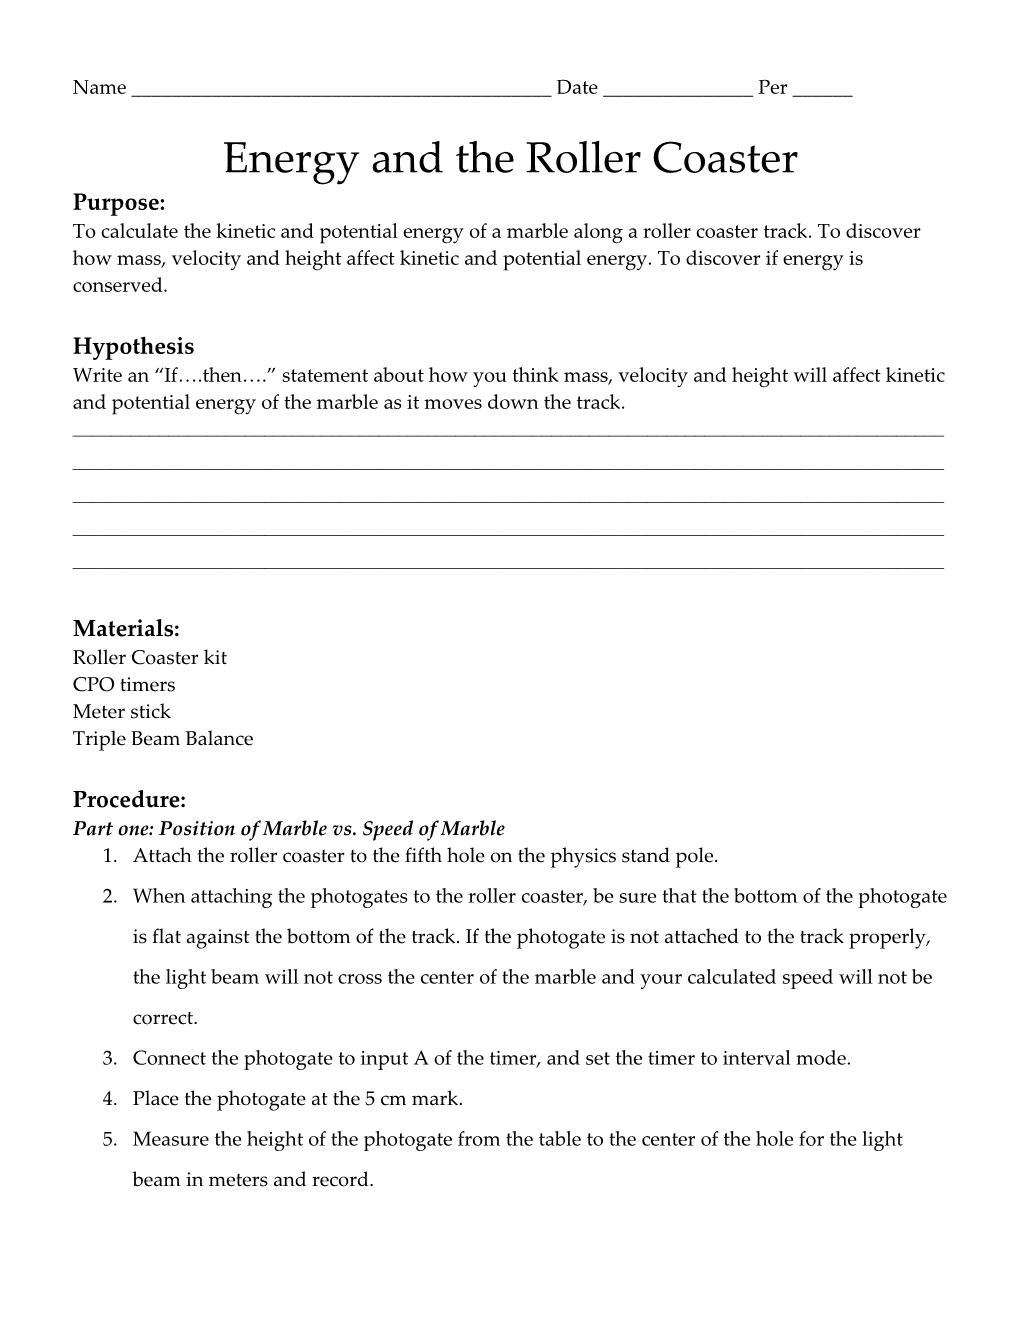 Energy and the Roller Coaster